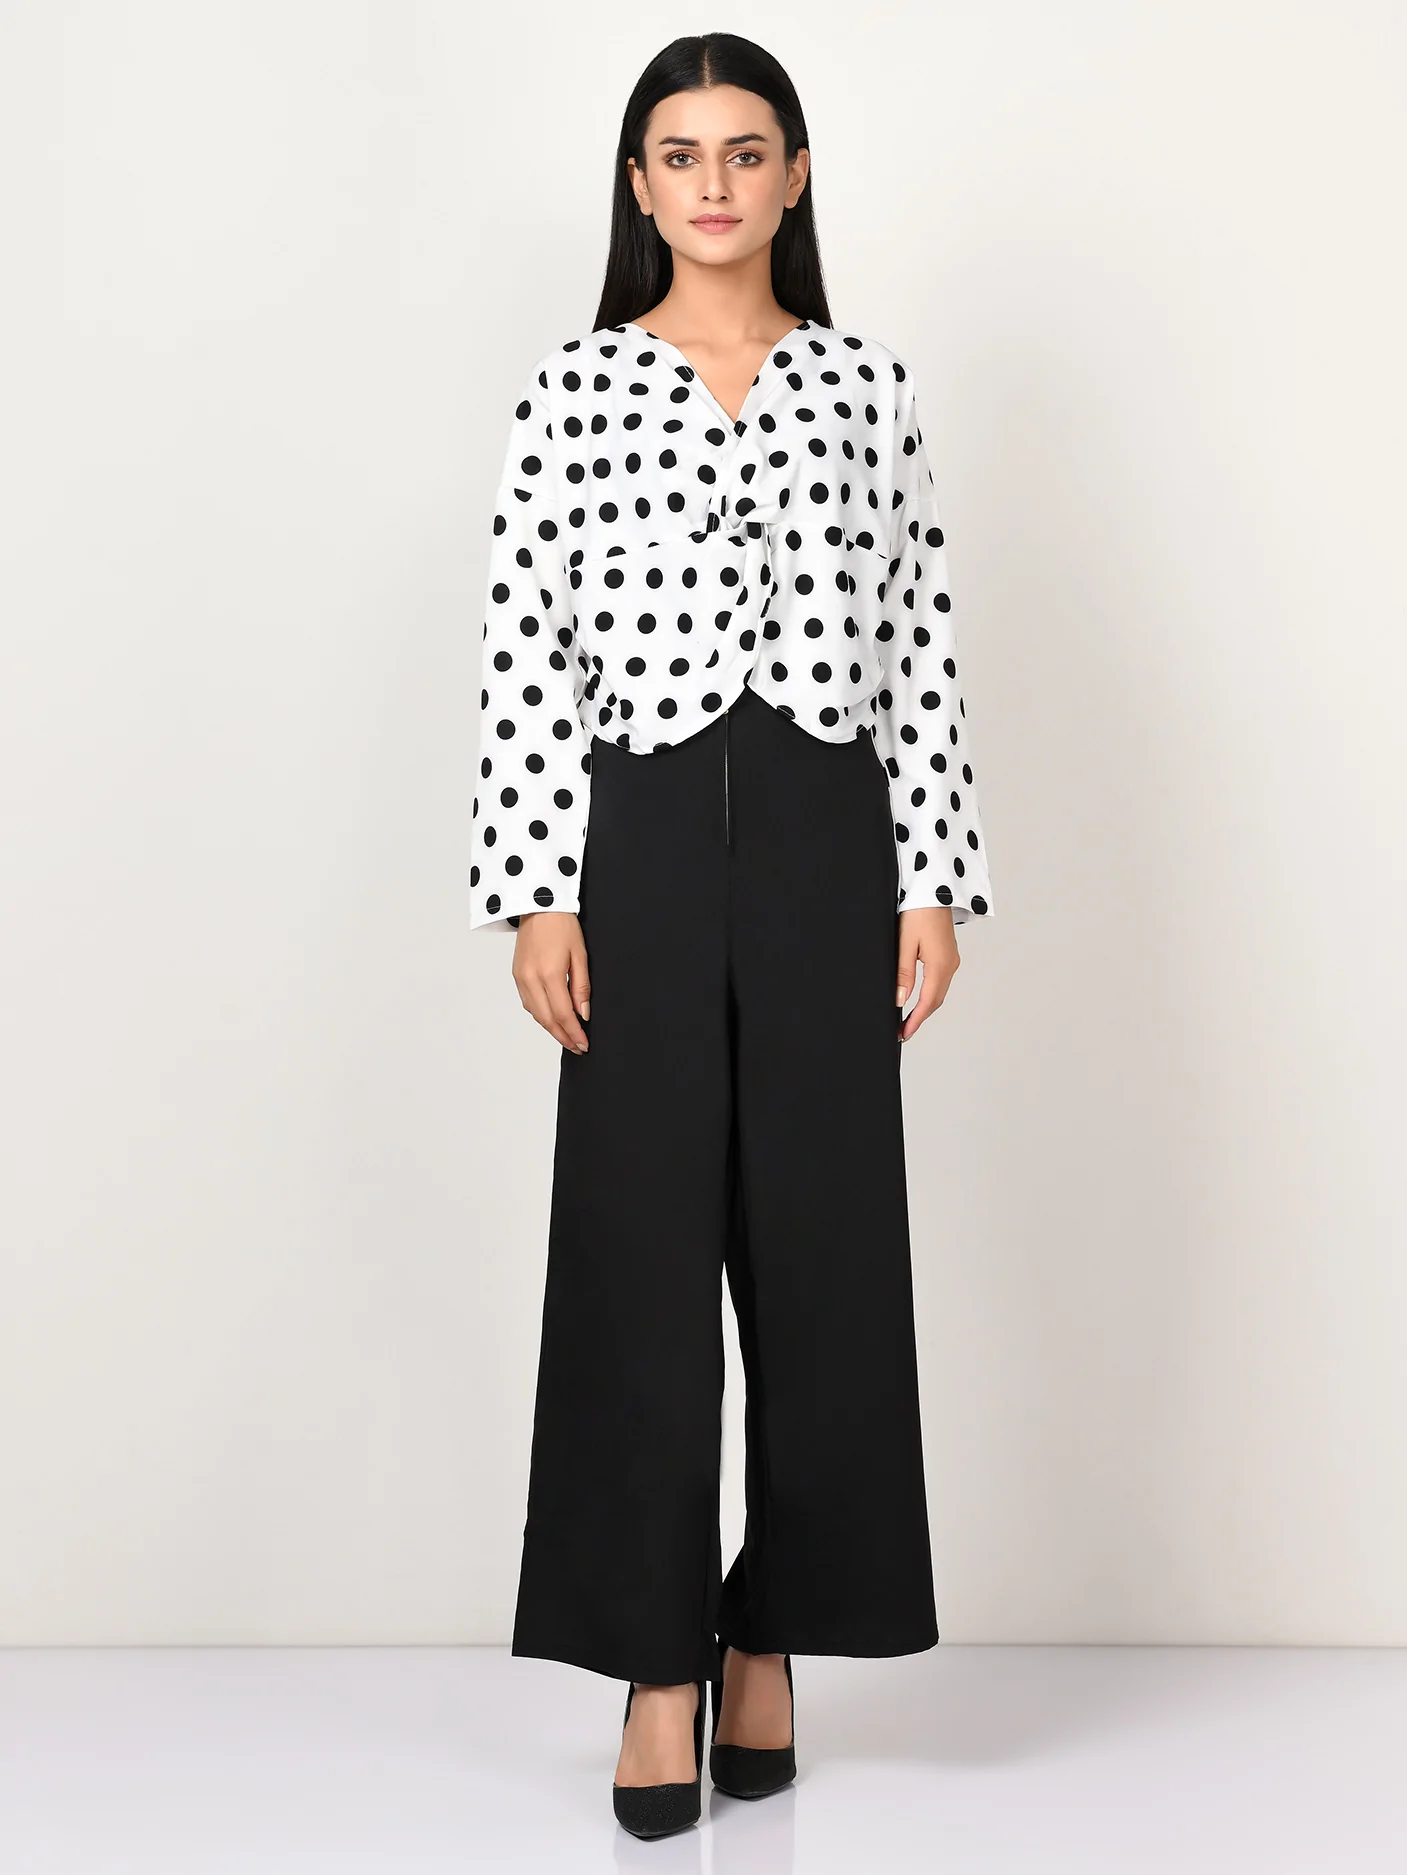 Black and white Polka dots by limelight